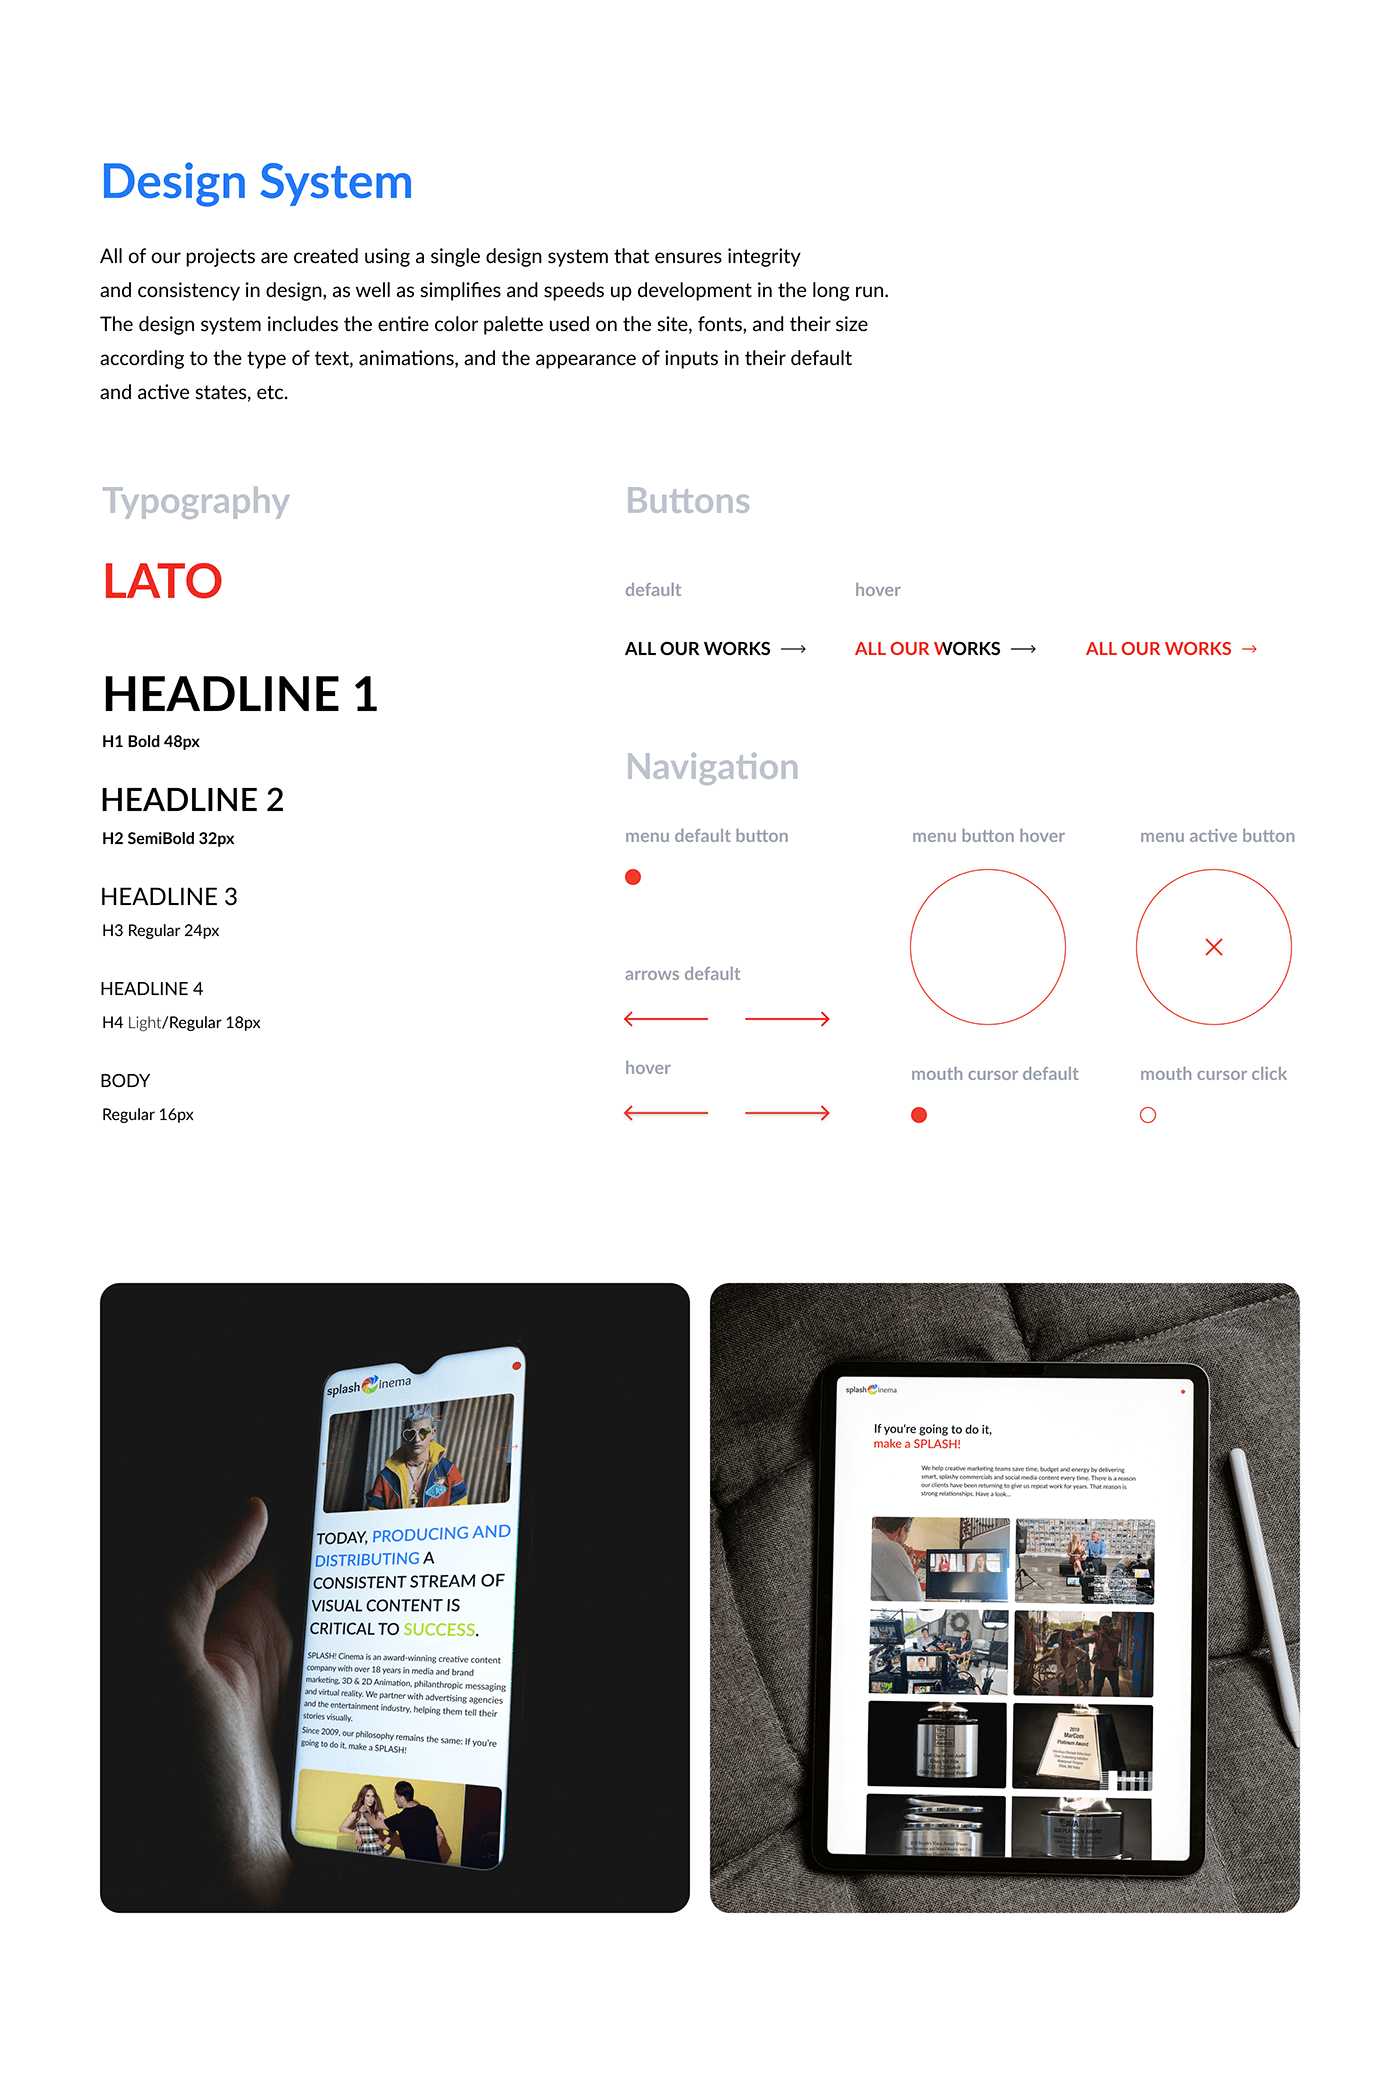 Design system for video production company